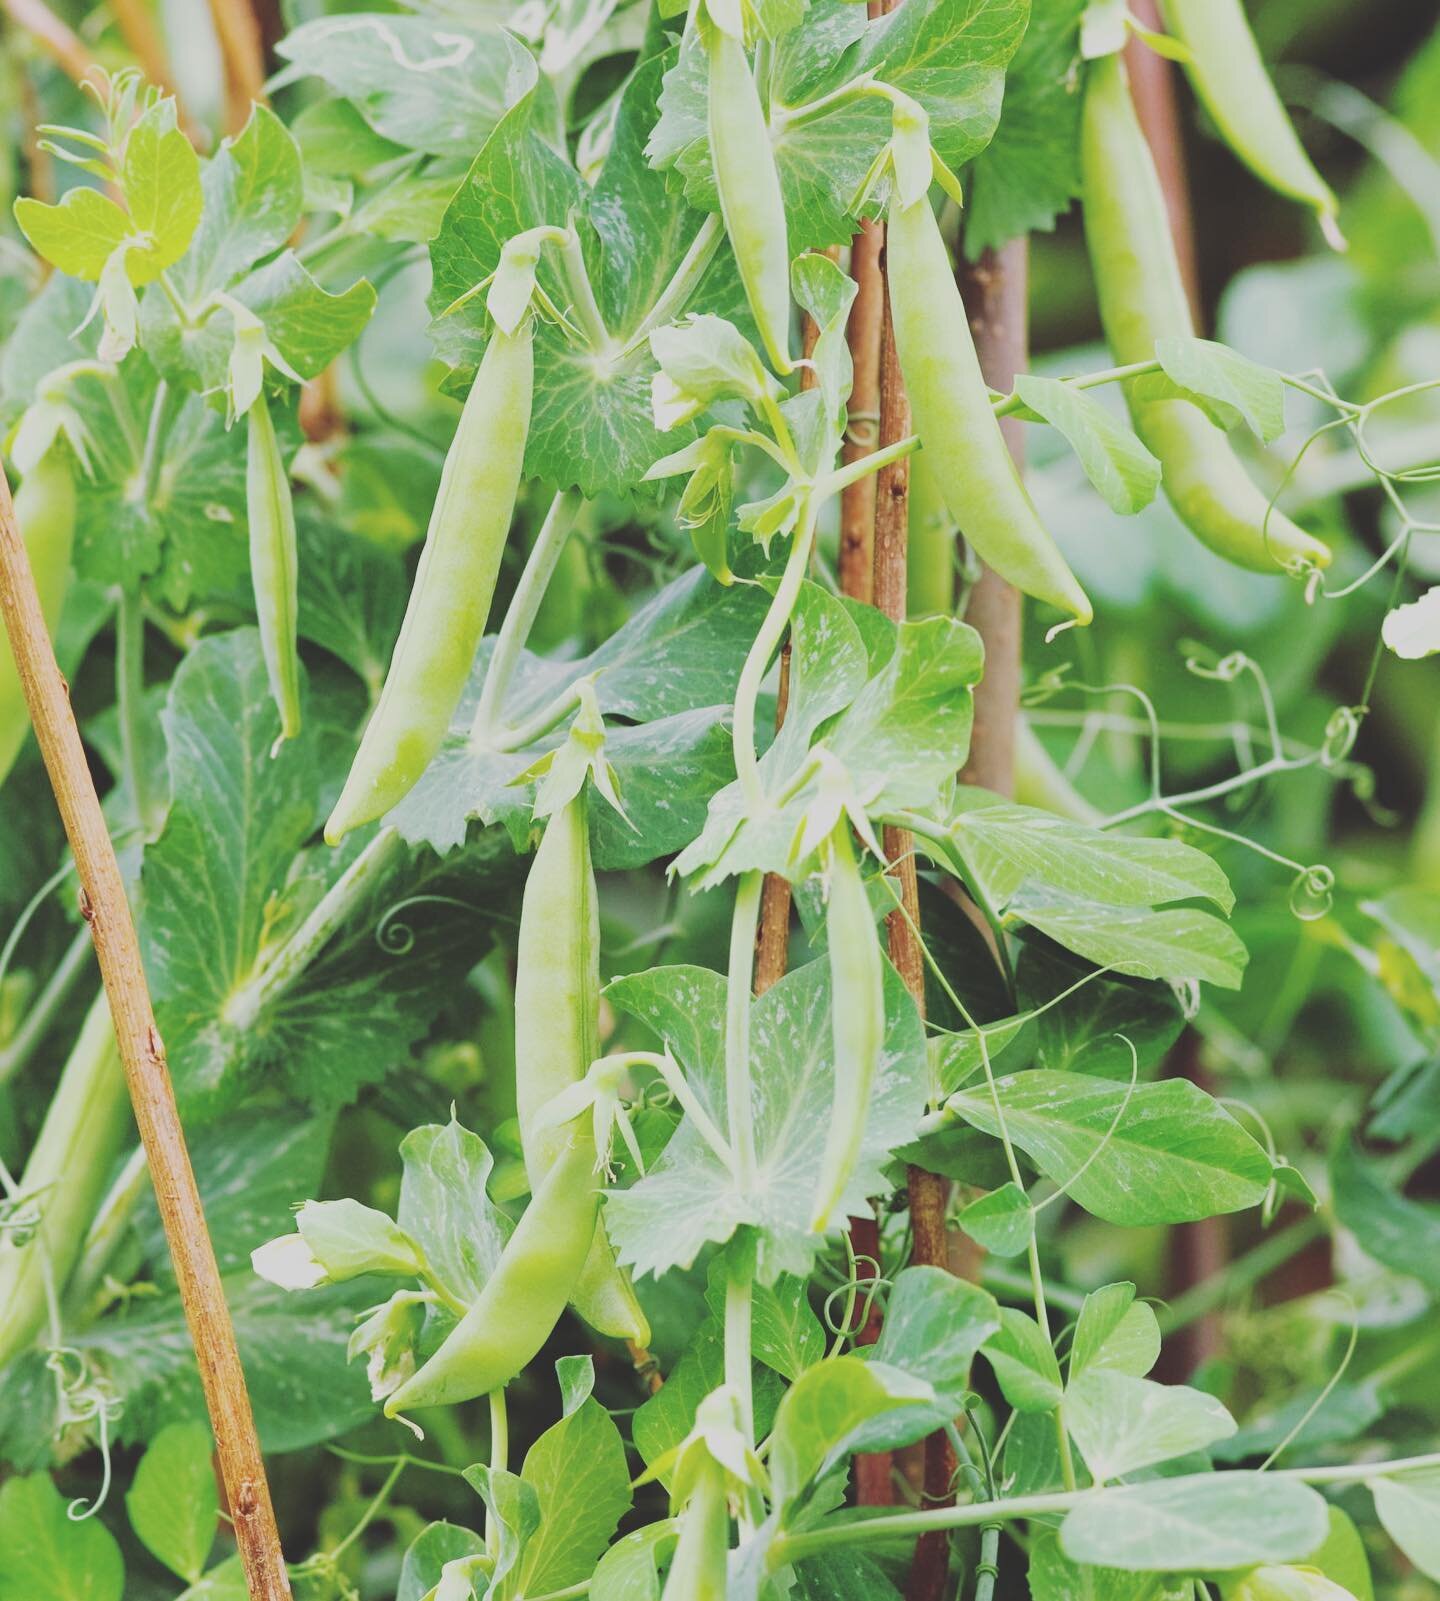 Let&rsquo;s talk about the different types of peas.  Peas grow best when temperatures are between 50-70&deg;F (10-21&deg;C). There are three types of peas to grow&mdash;shelling, snow, and snap.
&bull; Shelling peas are the classic garden pea. There 